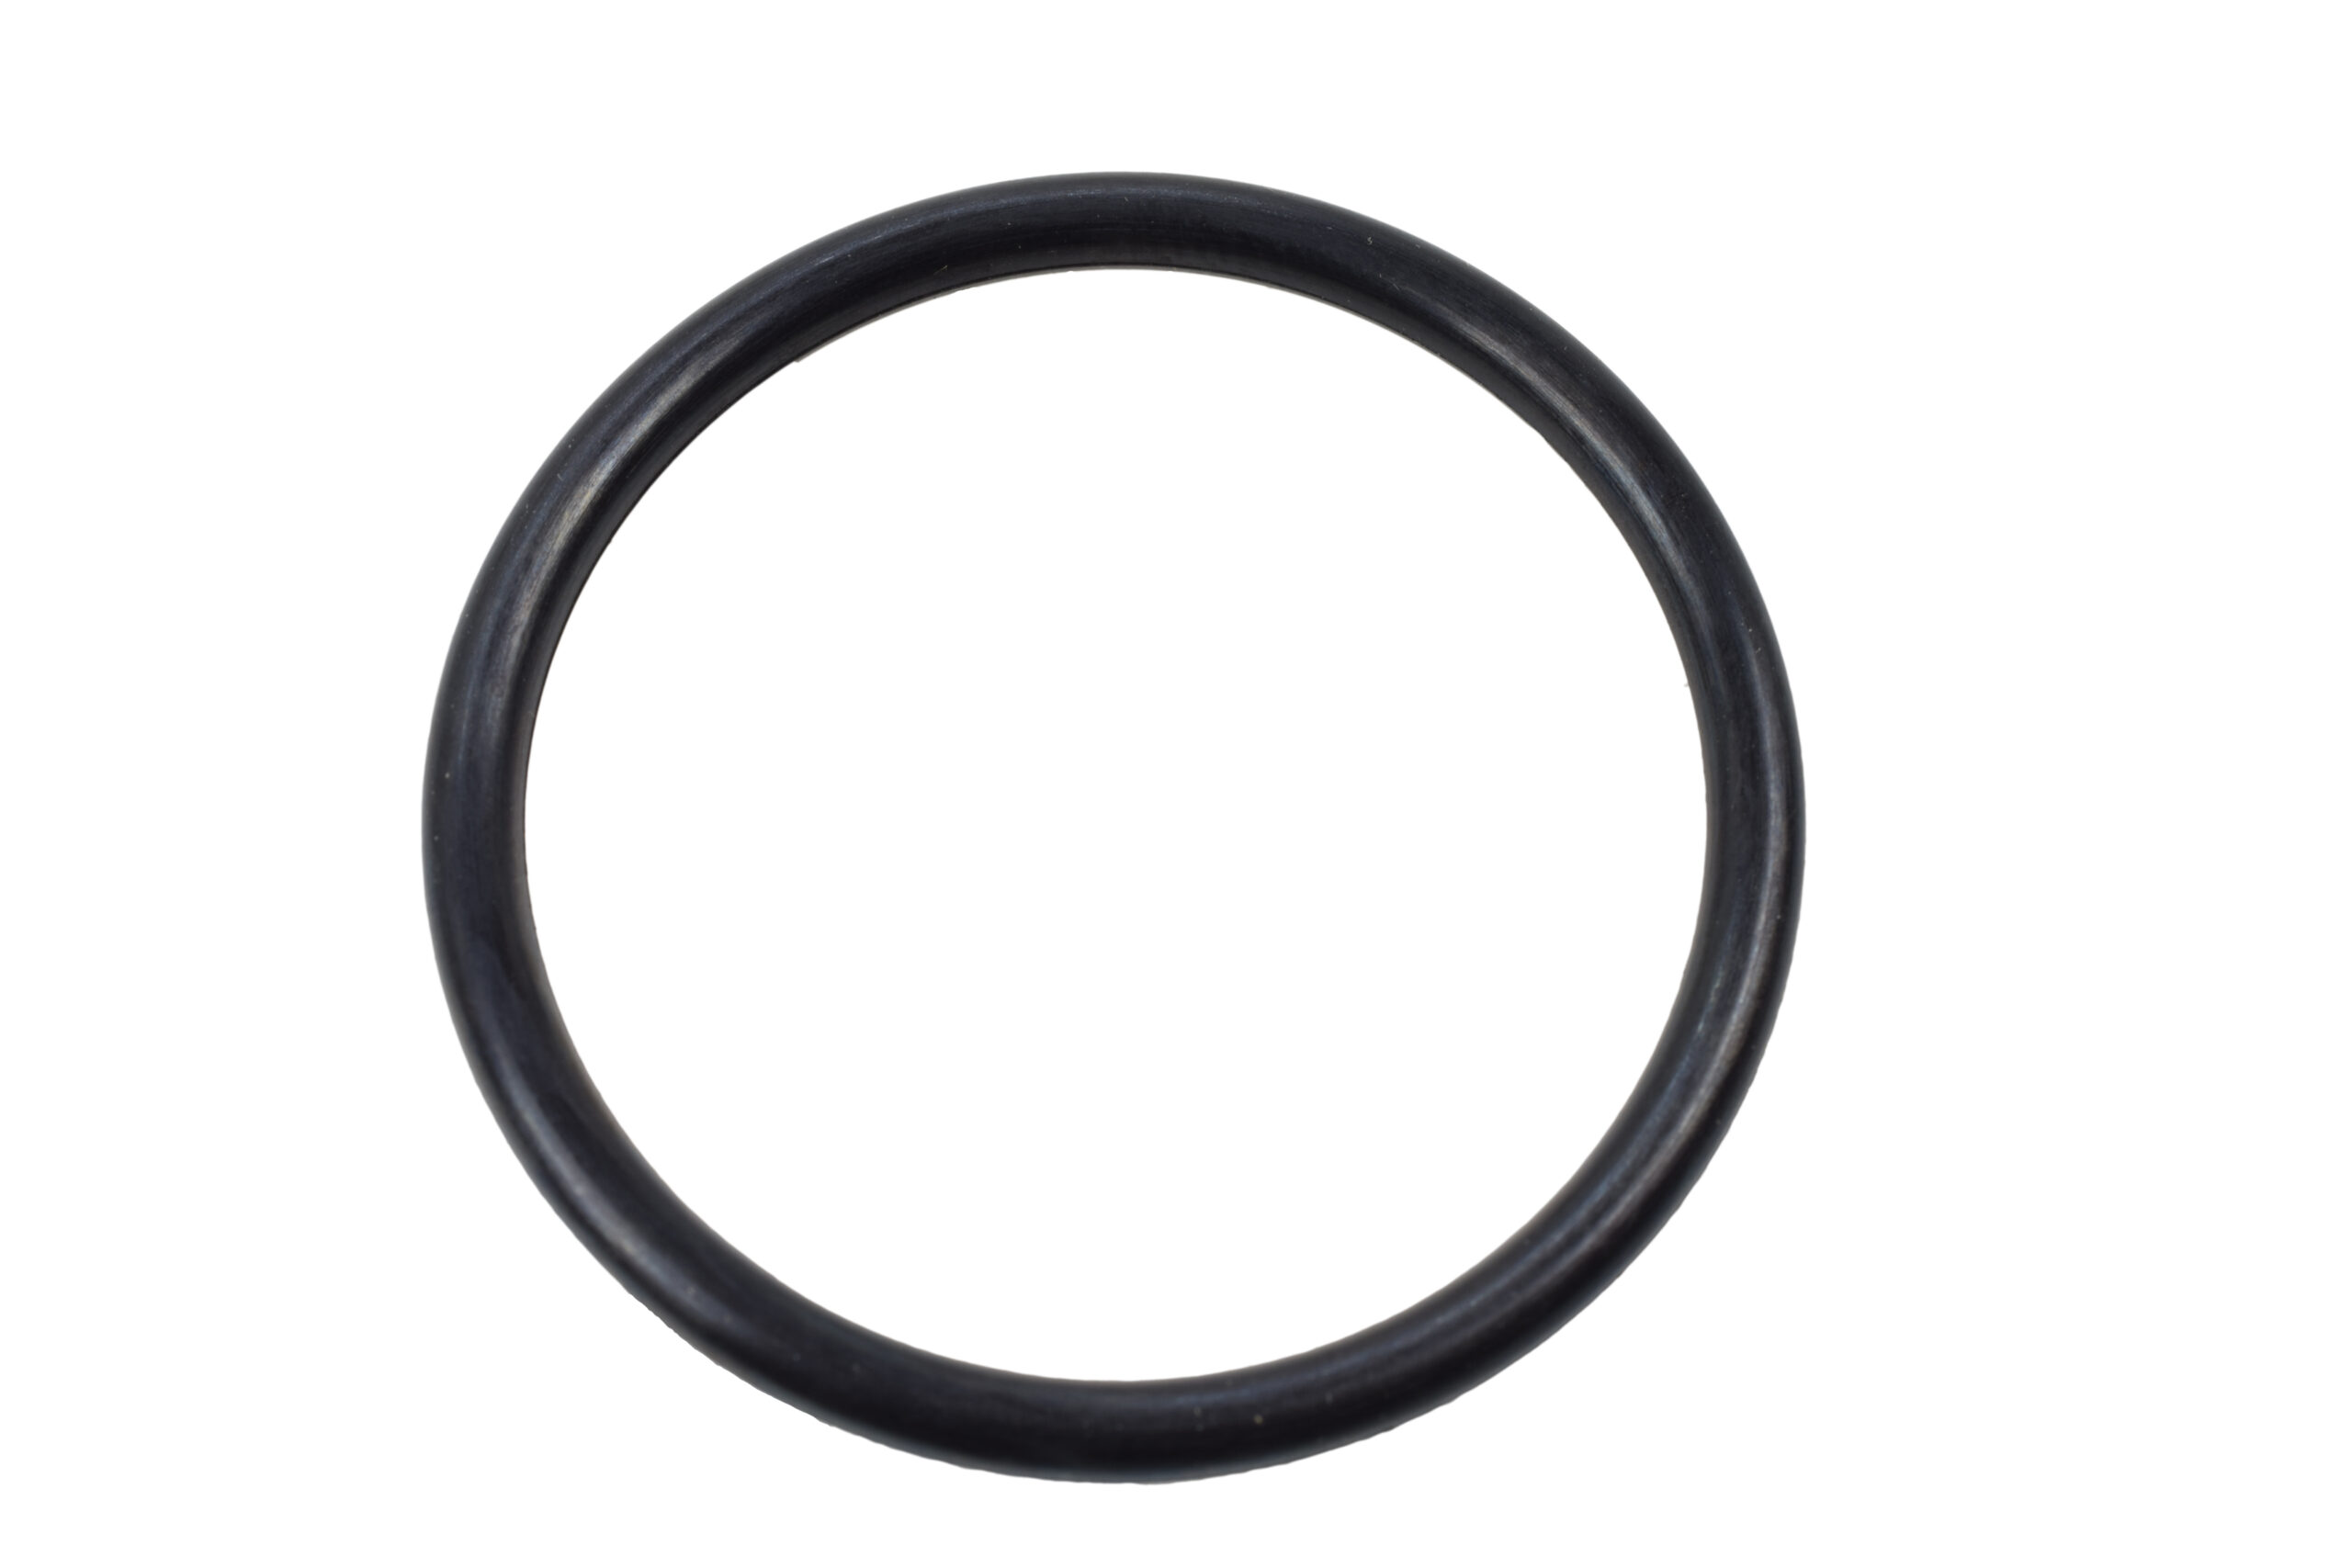 2405-O - LID O-RING FOR POP-TOP CANS - American Beverage Equipment Company